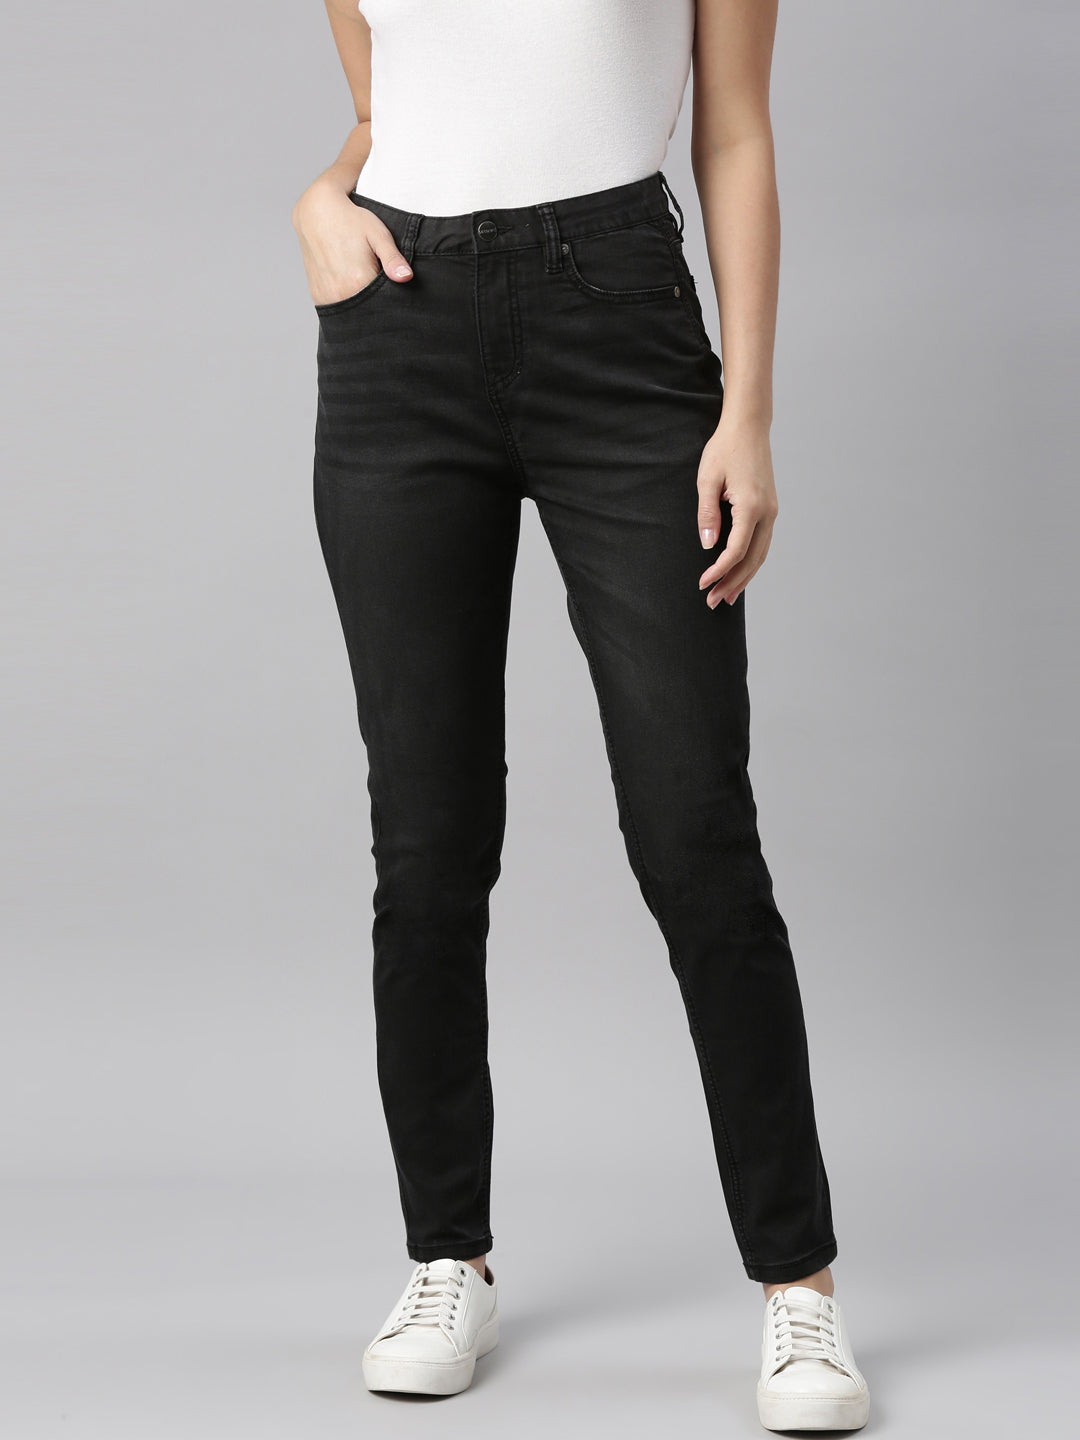 BDG High-Waisted Contrast Stitch Skate Jean – Black | Urban Outfitters